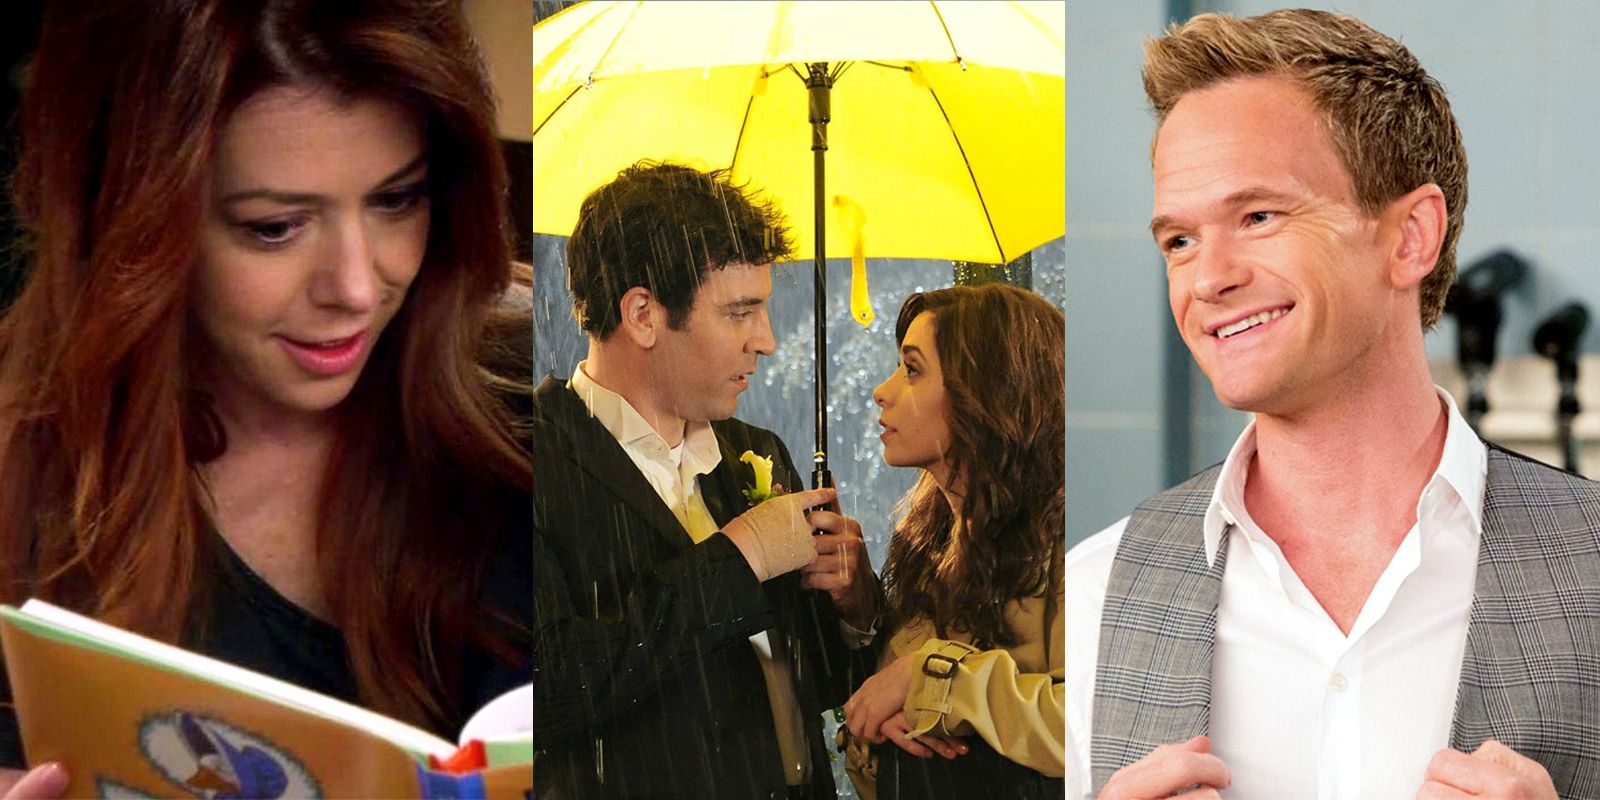 Split image of Lily reading to her child, Ted and Tracy under the yellow umbrella, and Barney smiling in How I Met Your Mother.